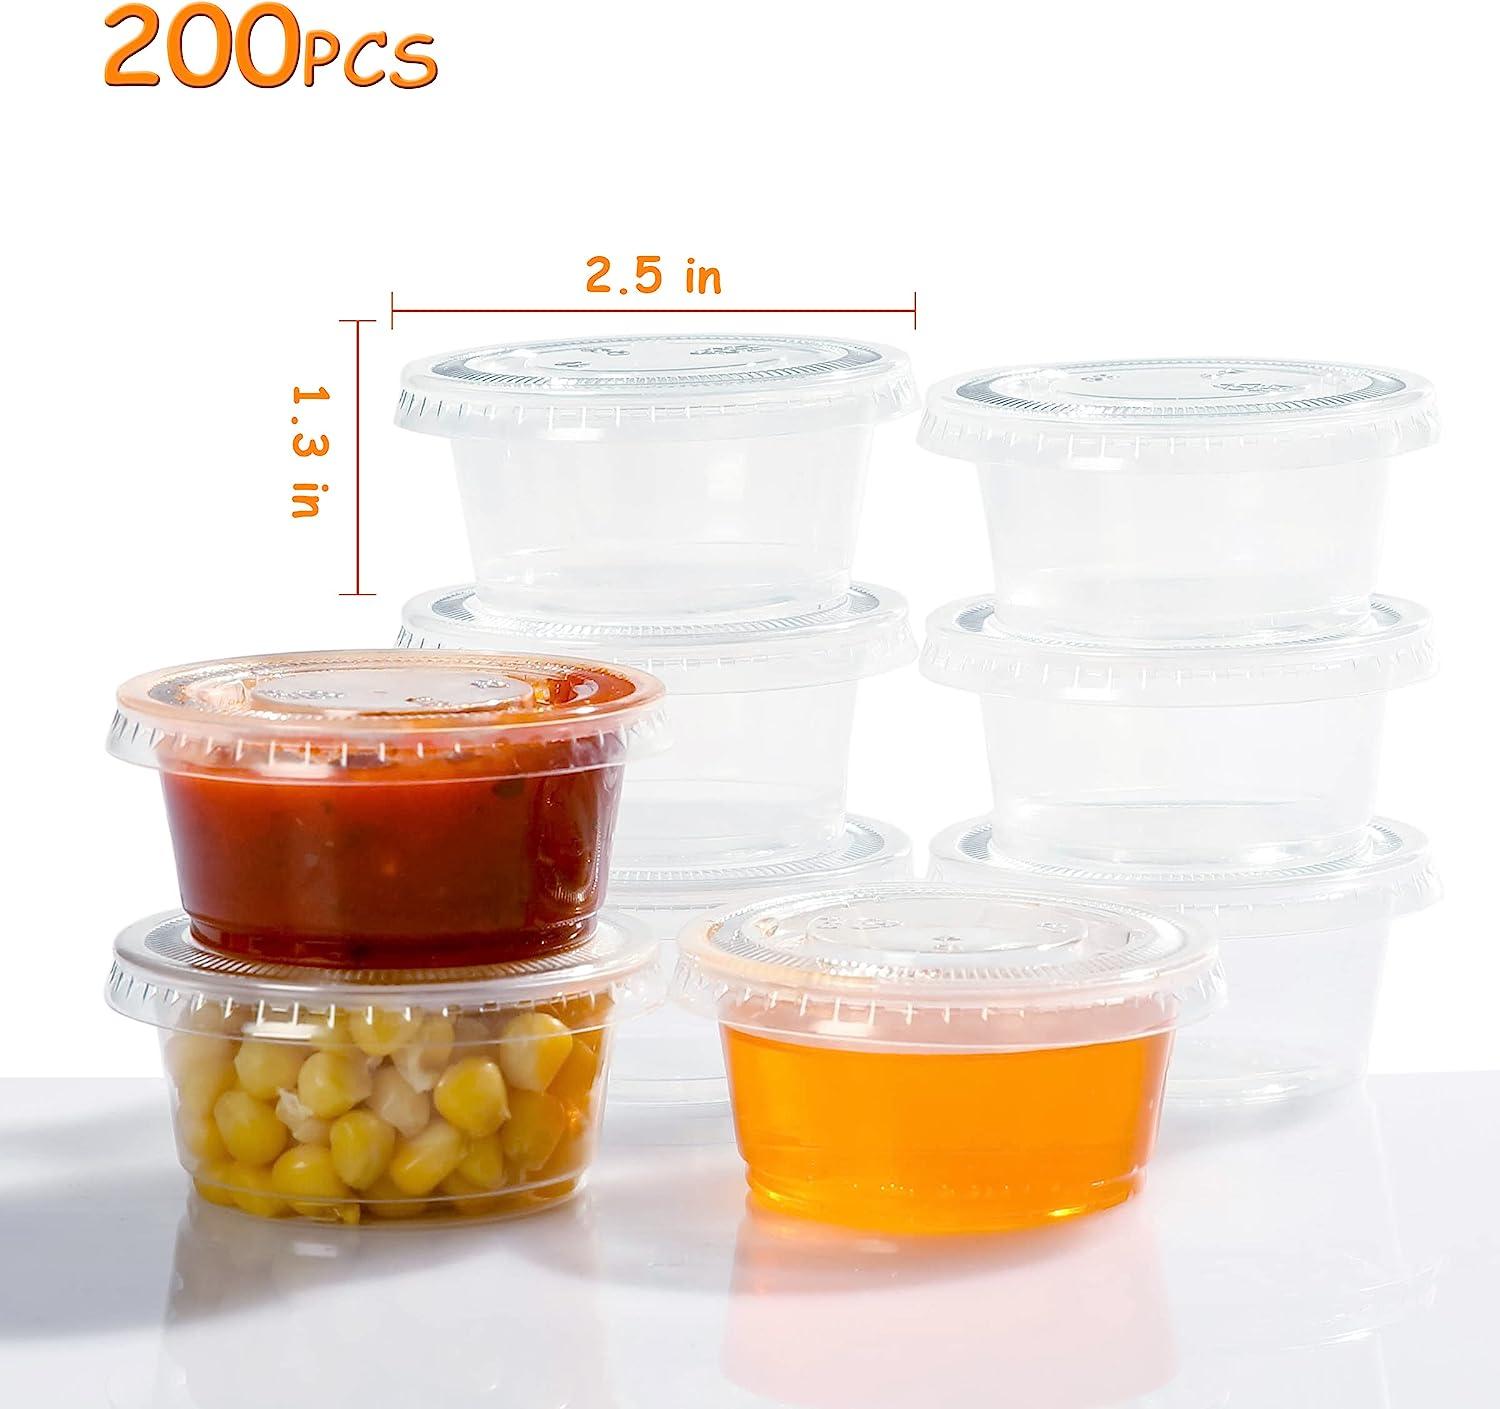 Condiment Cups container with Lids- 8 pk. 1 oz. Dressing Container to go  Small Food Storage Containers with Lids- Sauce Cups Leak proof Reusable